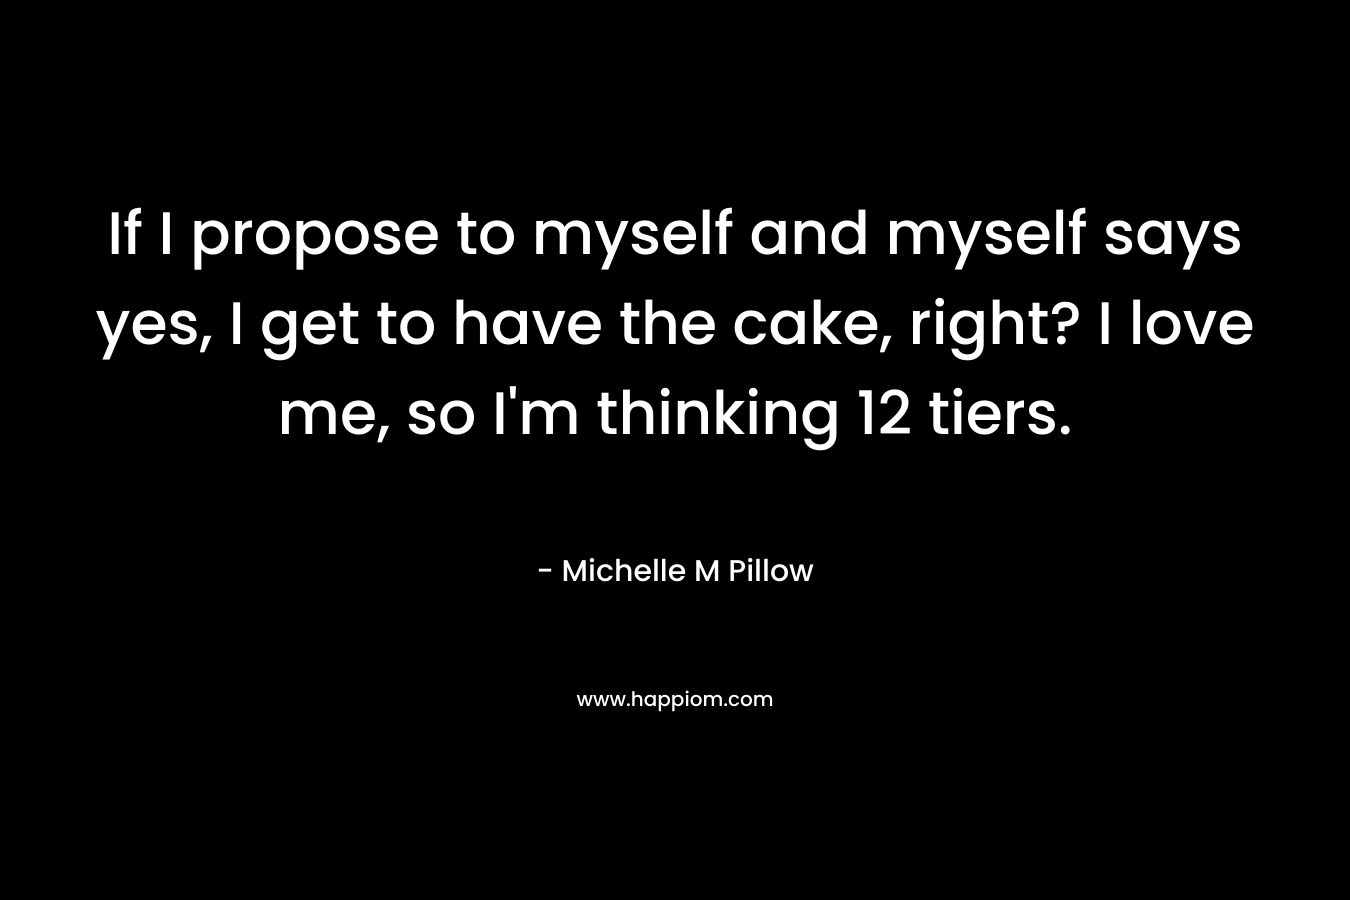 If I propose to myself and myself says yes, I get to have the cake, right? I love me, so I’m thinking 12 tiers. – Michelle M Pillow